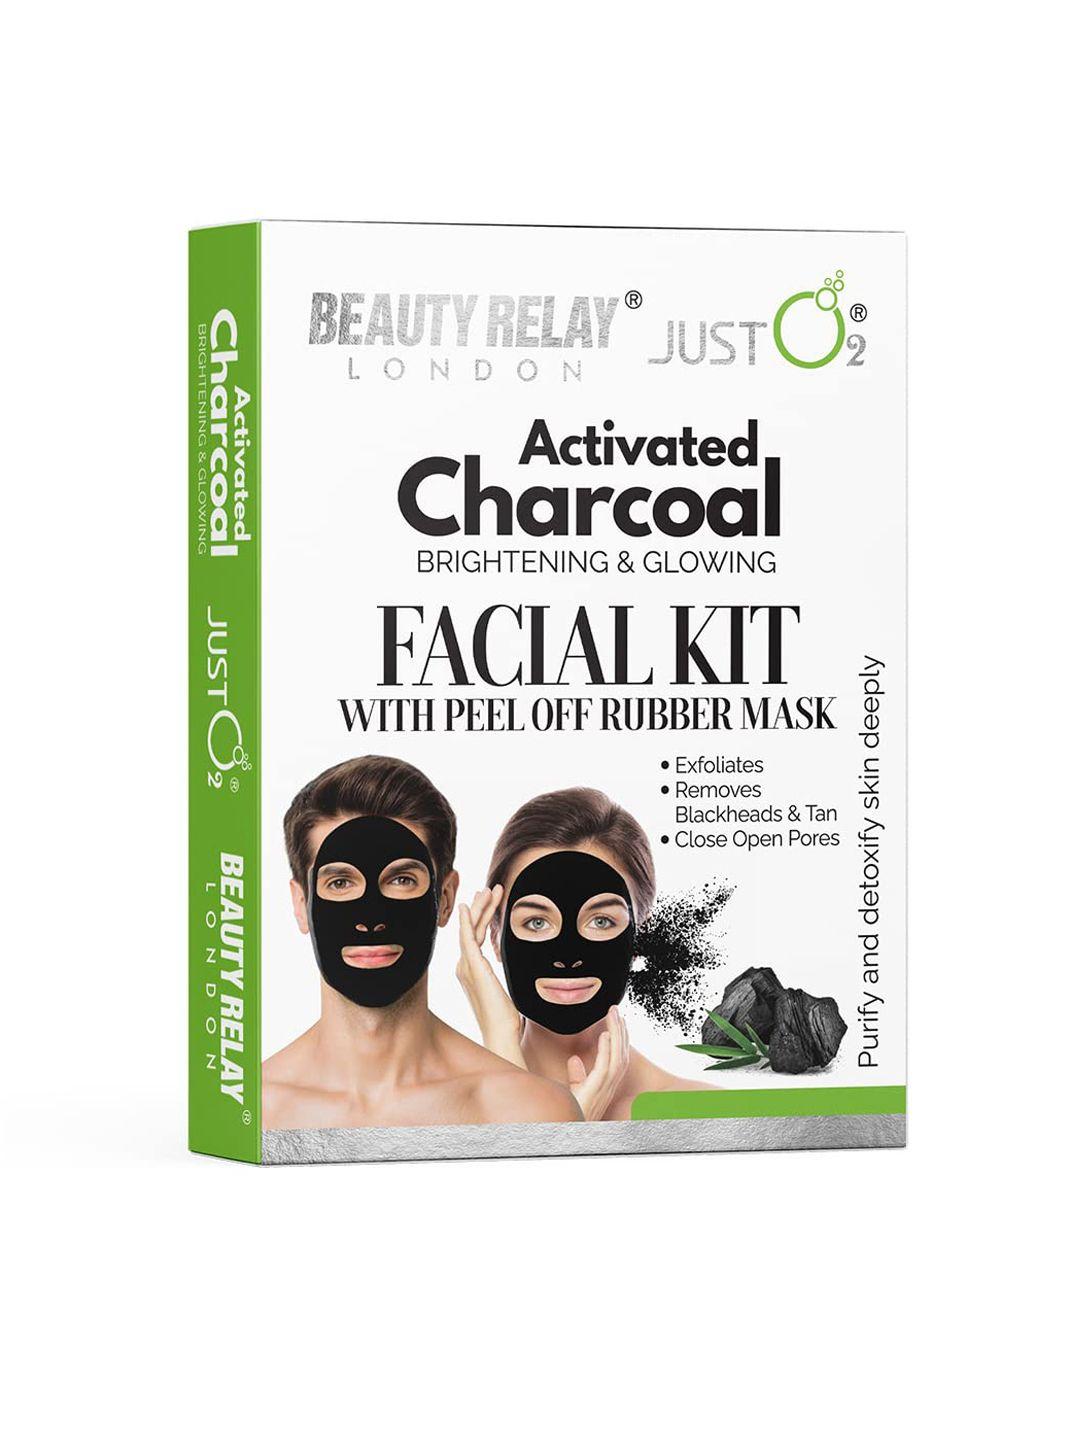 beautyrelay london activated charcoal facial kit with peel off rubber mask 59g